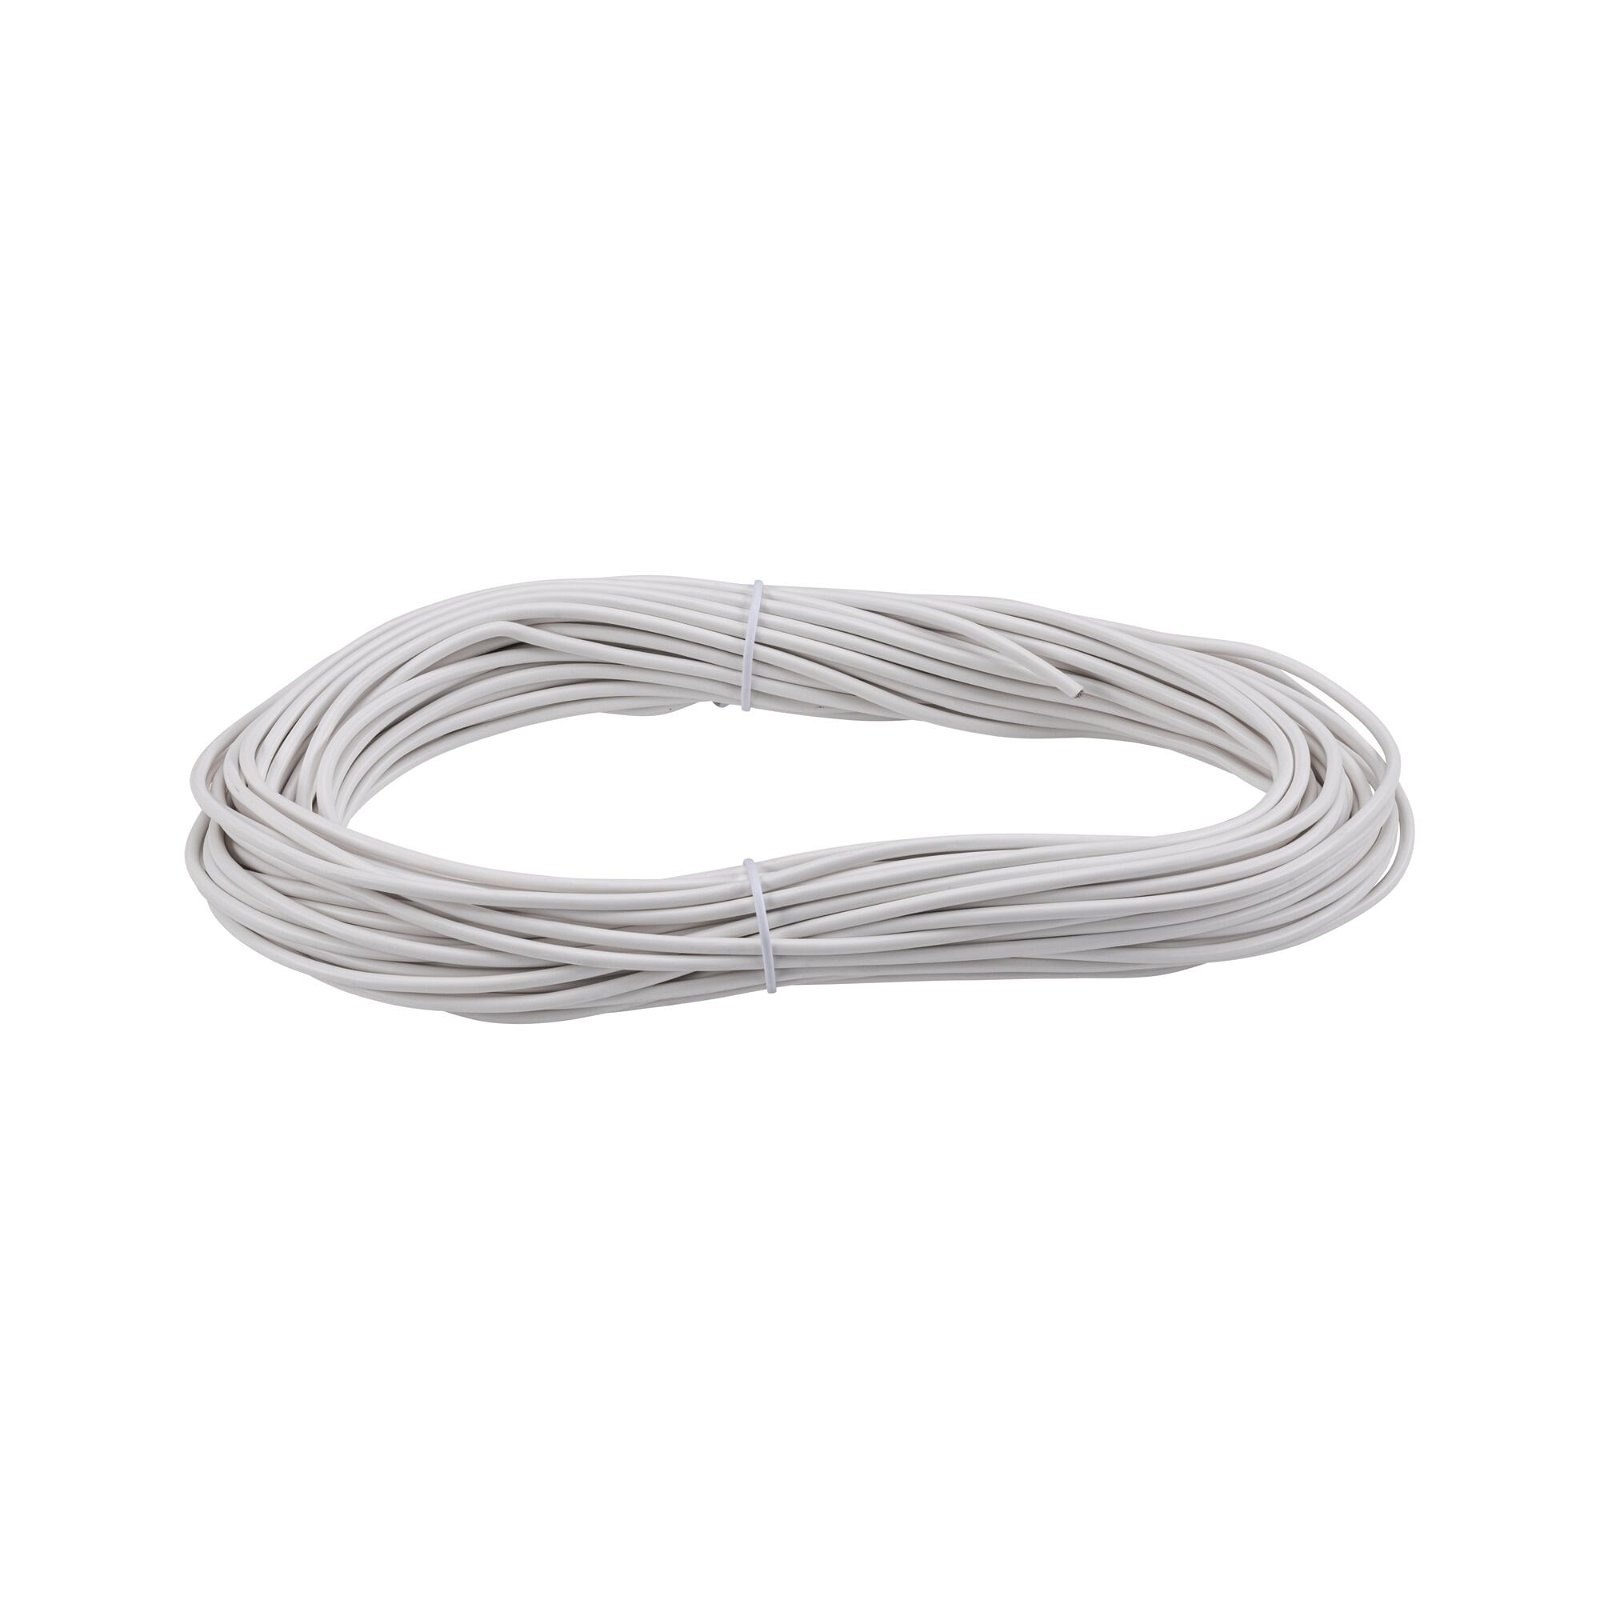 CorDuo Cable system Tension cable 20m 2,5qmm White